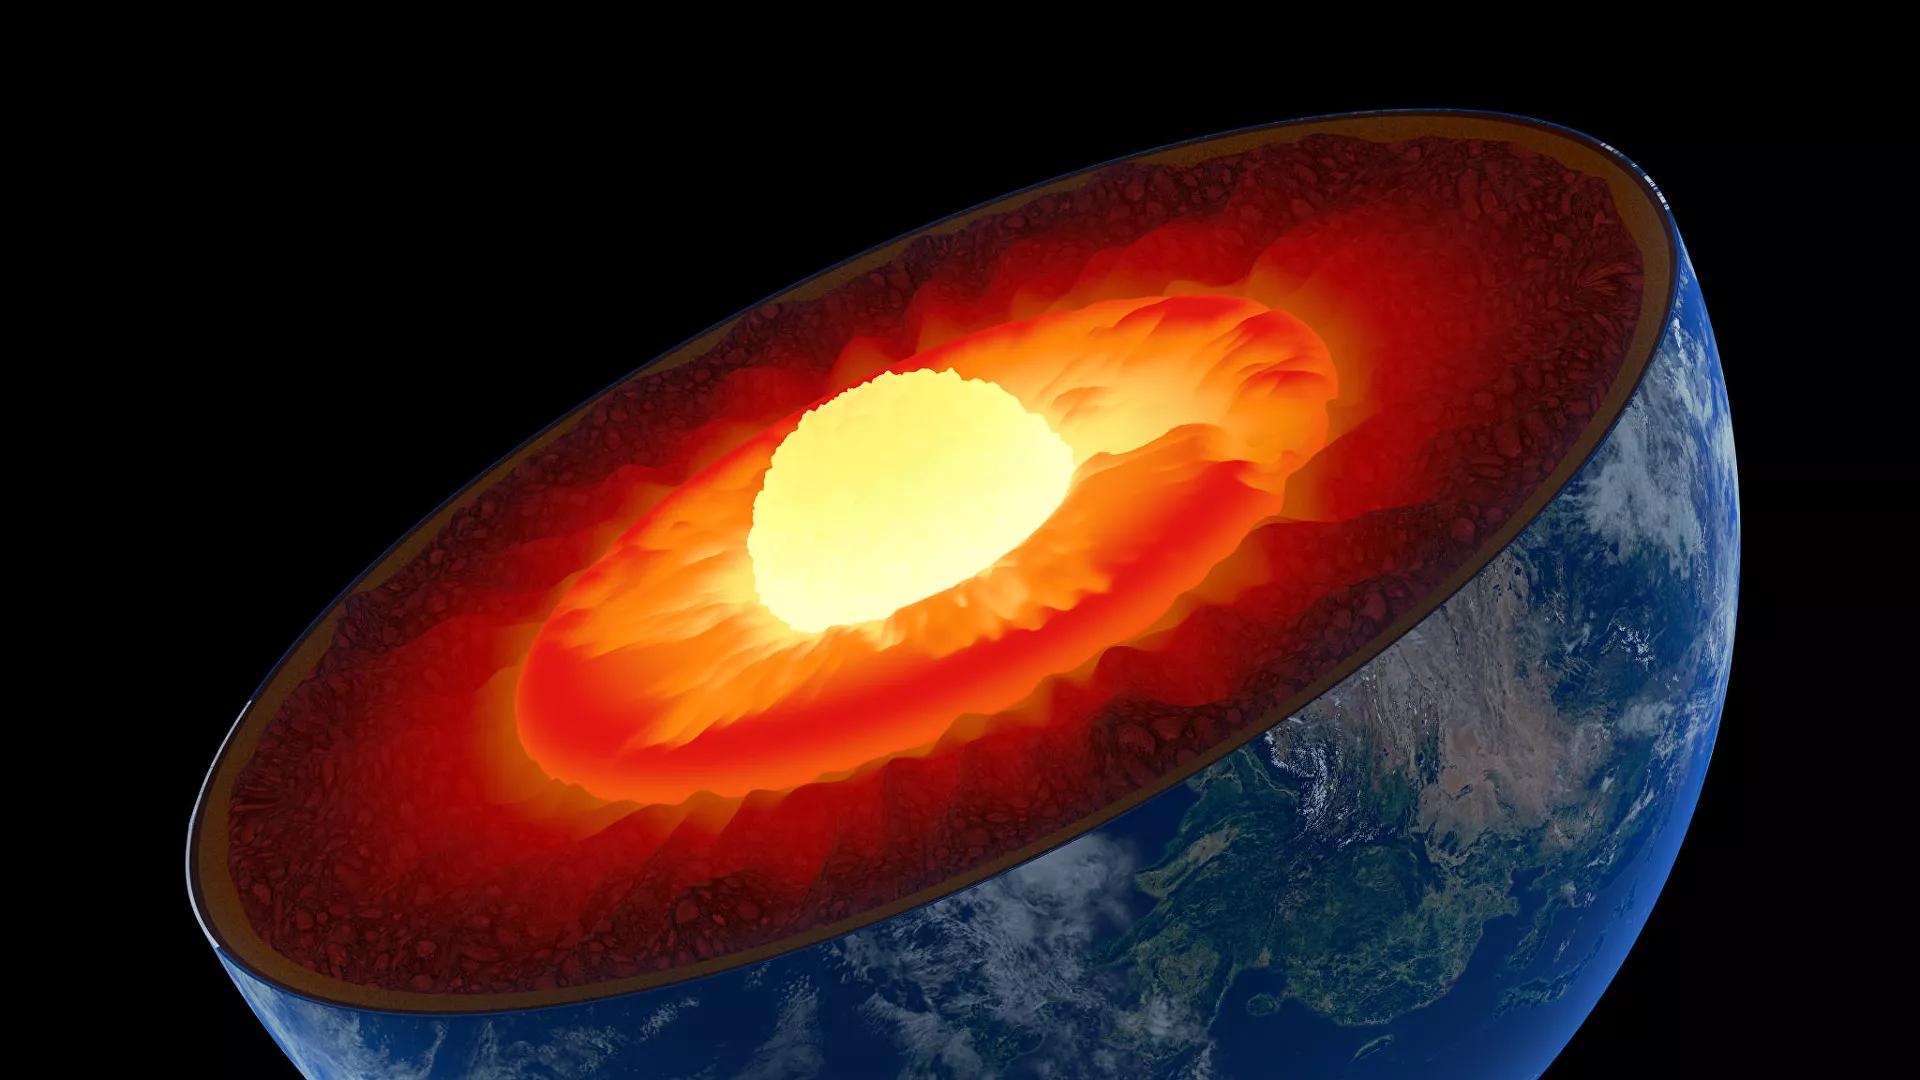 Plumes From Earth’s Mantle Could Cause Supervolcano Eruptions, Continental Breakdown, Scientist Says